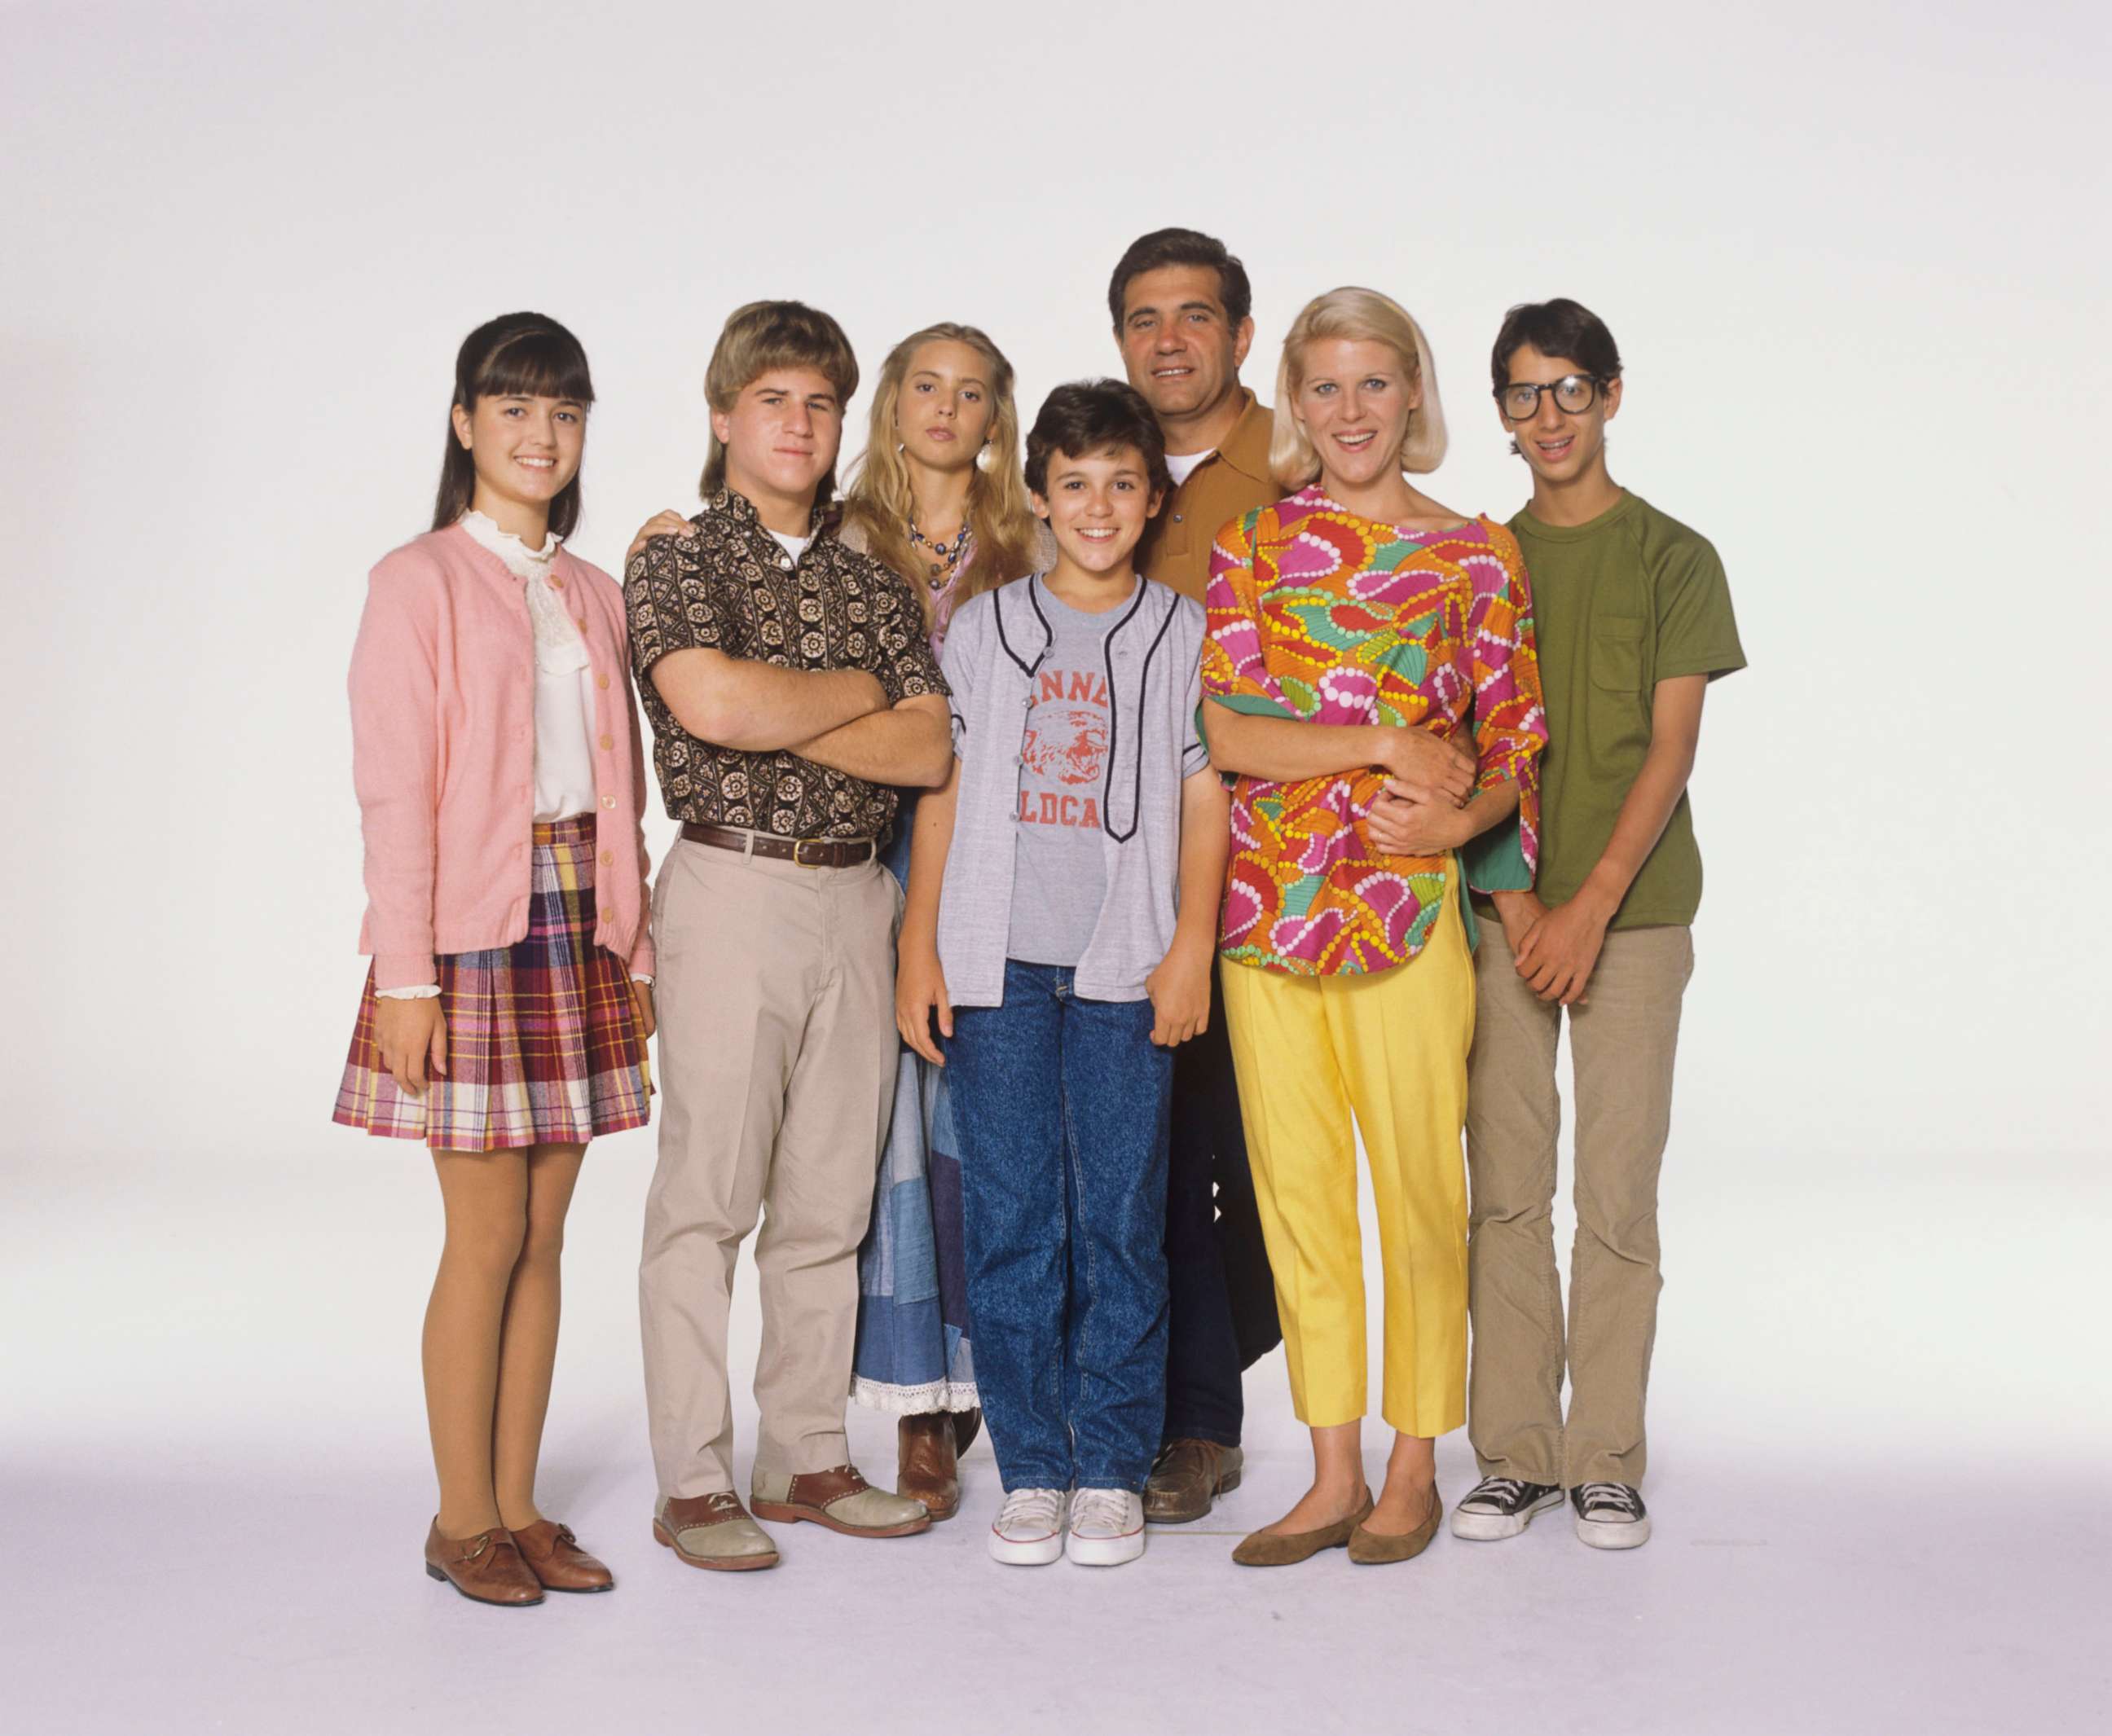 PHOTO: The cast of The Wonder Years is shown in this undated file photo.